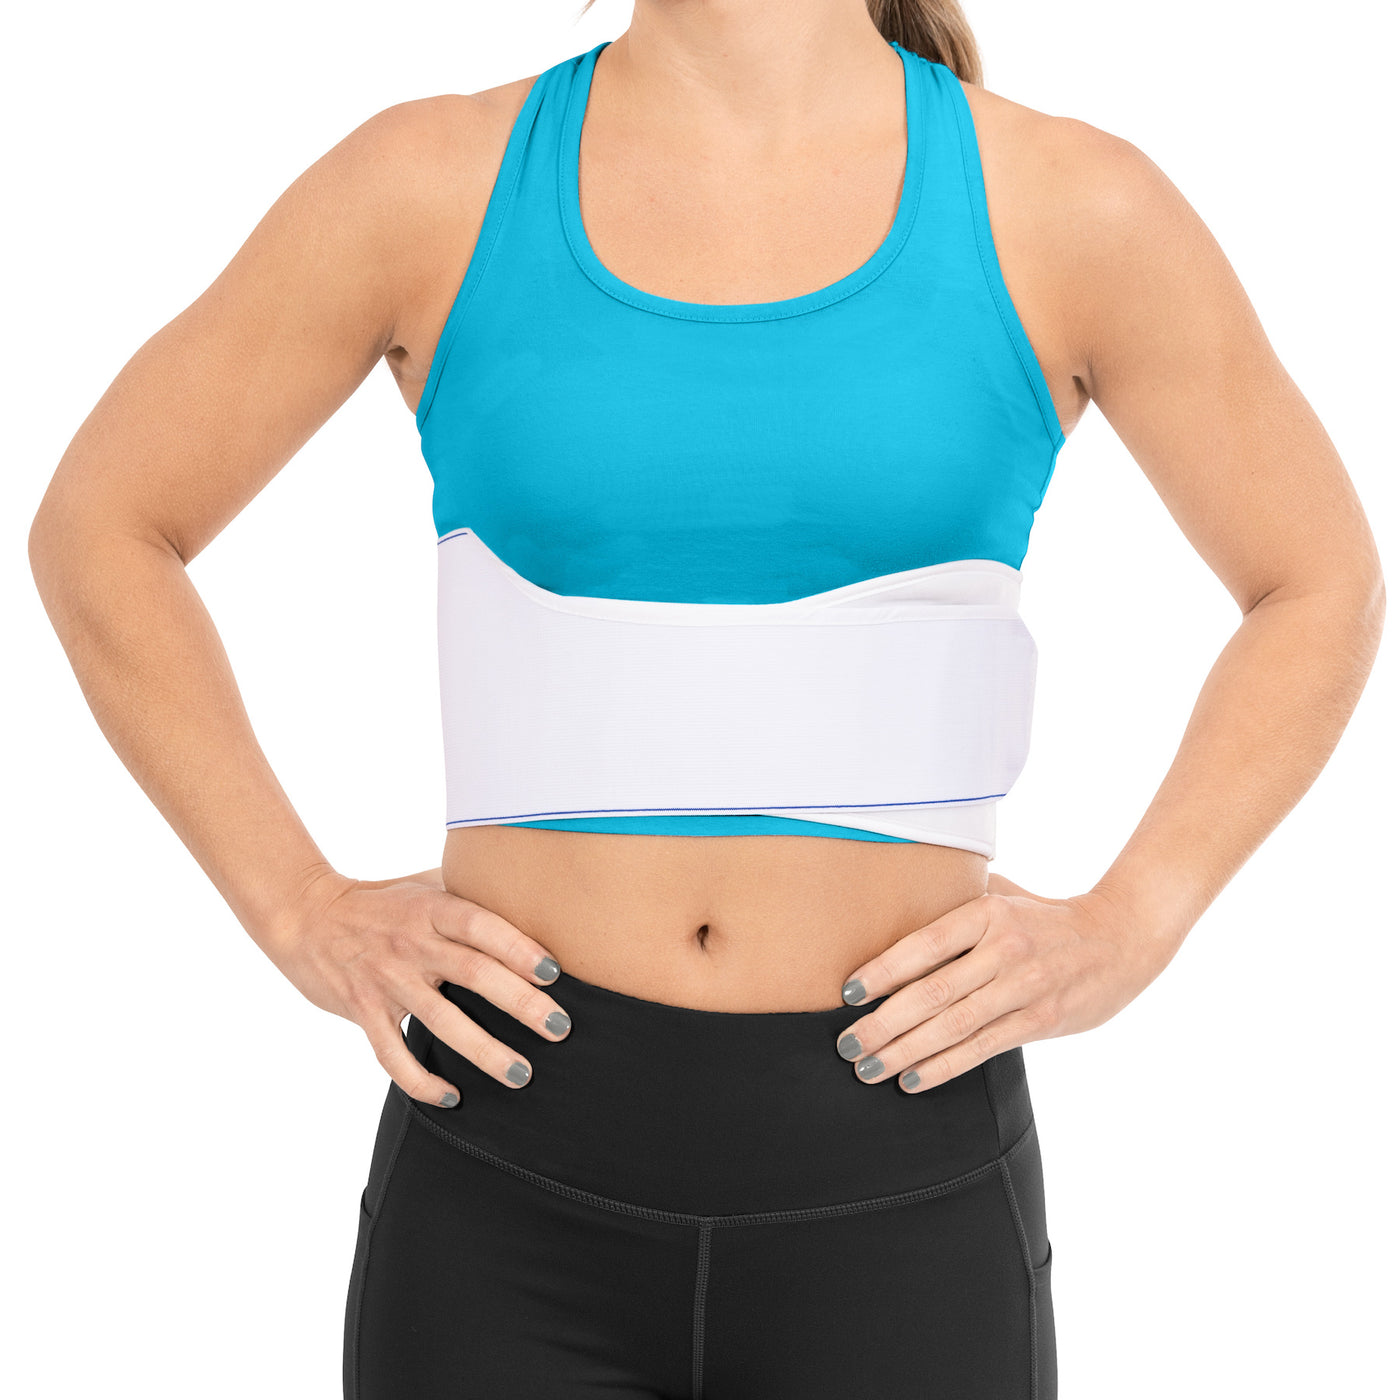 Does your bra fit correctly?  Central Health Physiotherapy